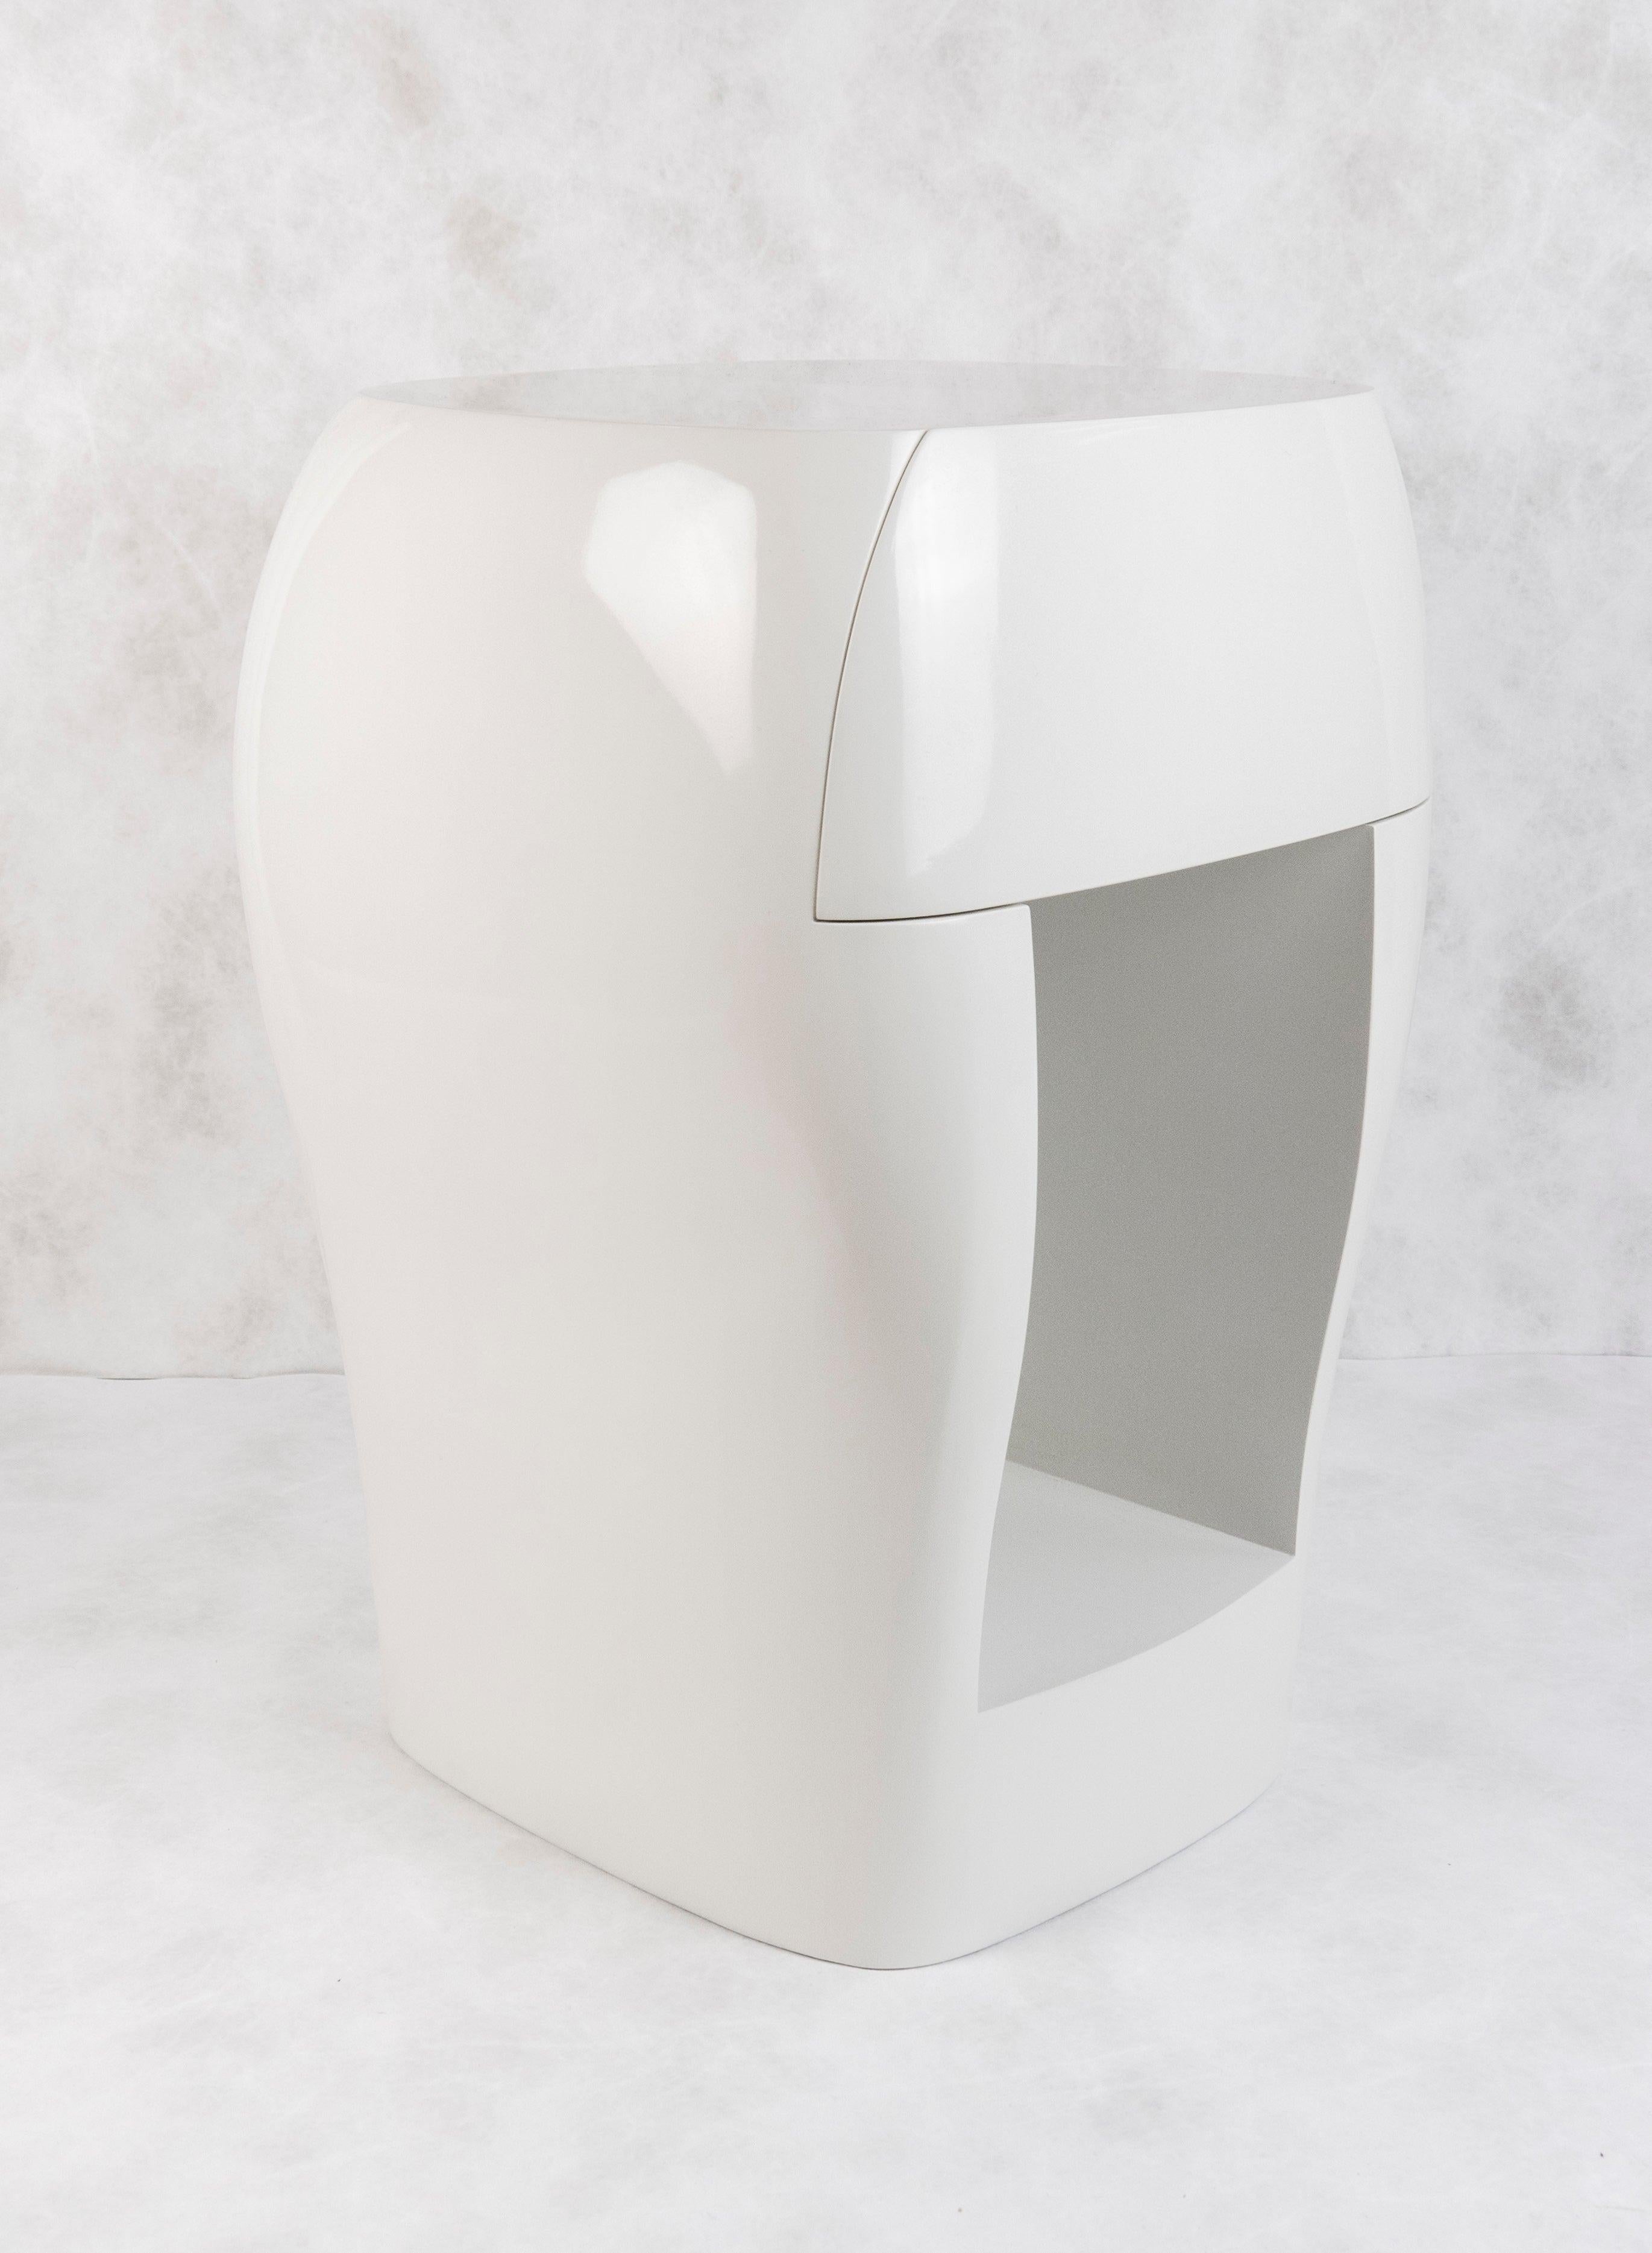 Sculpted bedside tables with drawer by Jacques Jarrige.
Open shelf at the bottom. A signed work of art.
Priced per nightstand. Pair available.